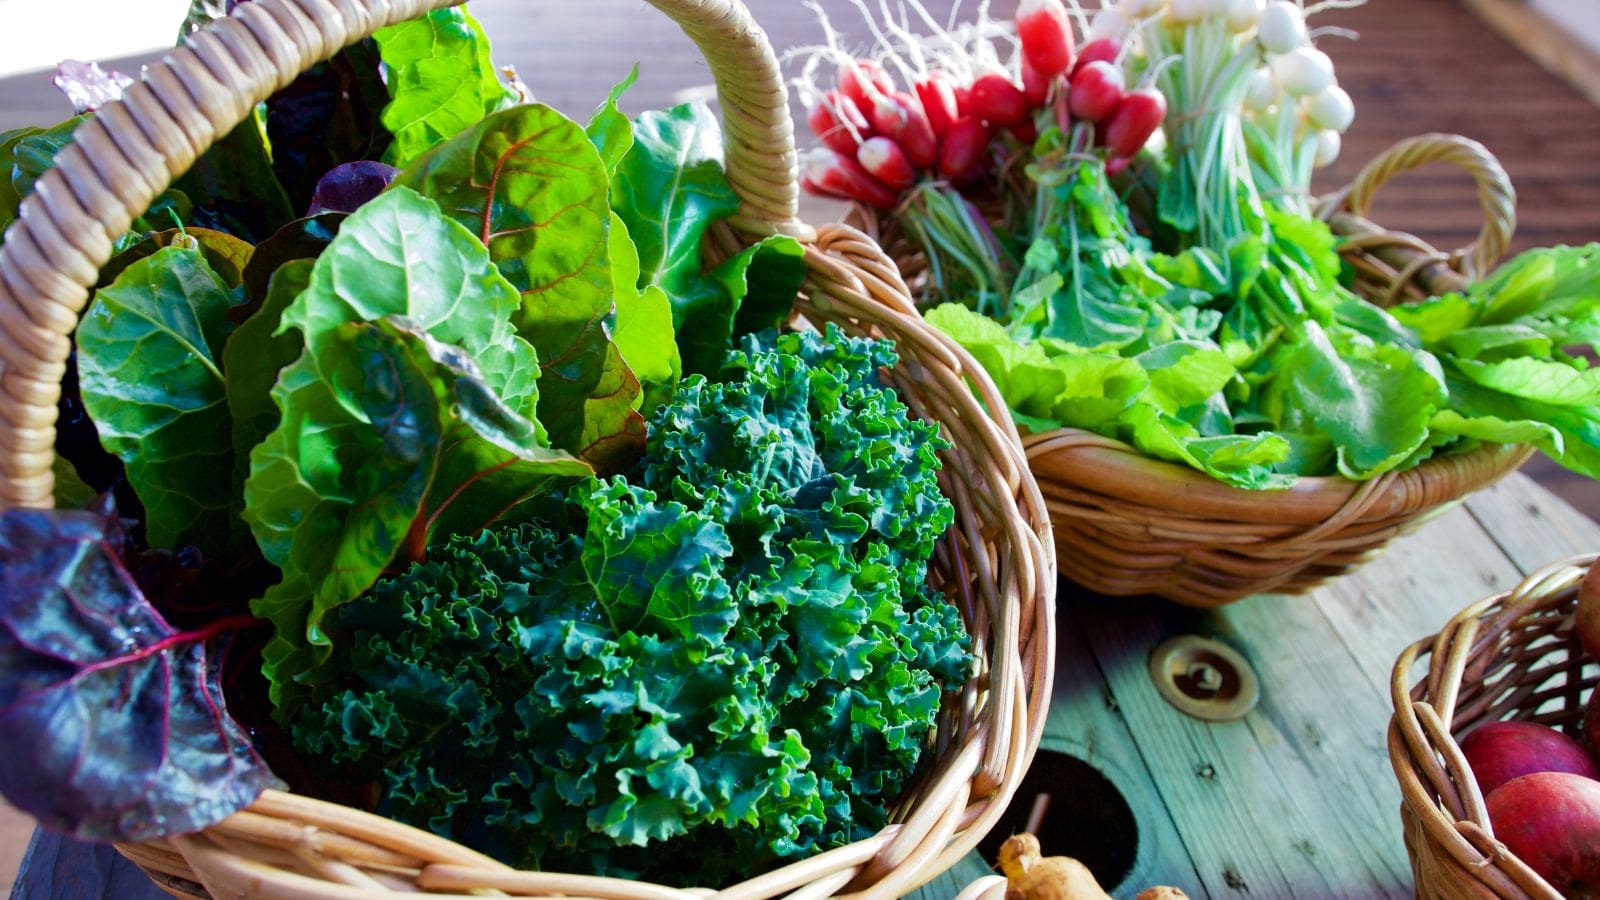 Leafy greens protect collagen